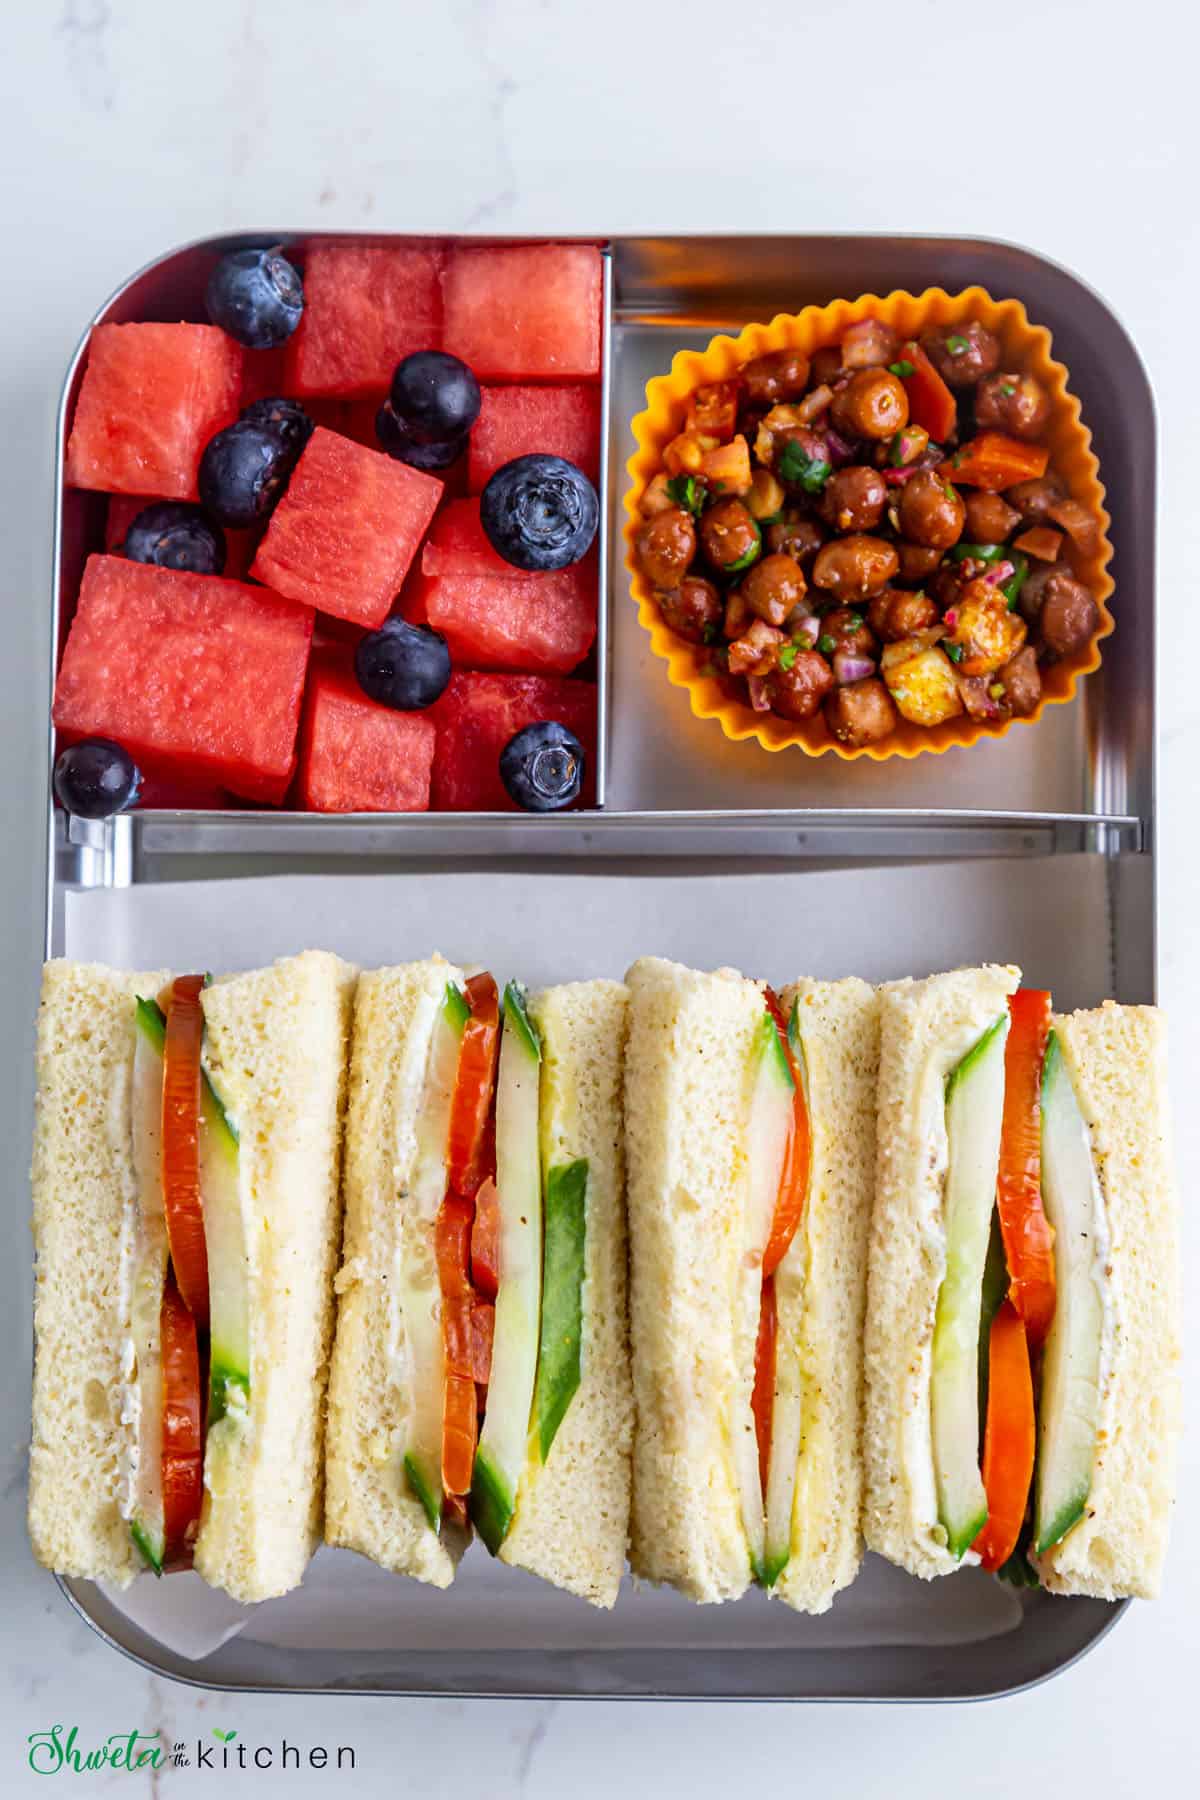 Tomato cucumber sandwich in stainless steel lunchbox with chickpea salad and fruits